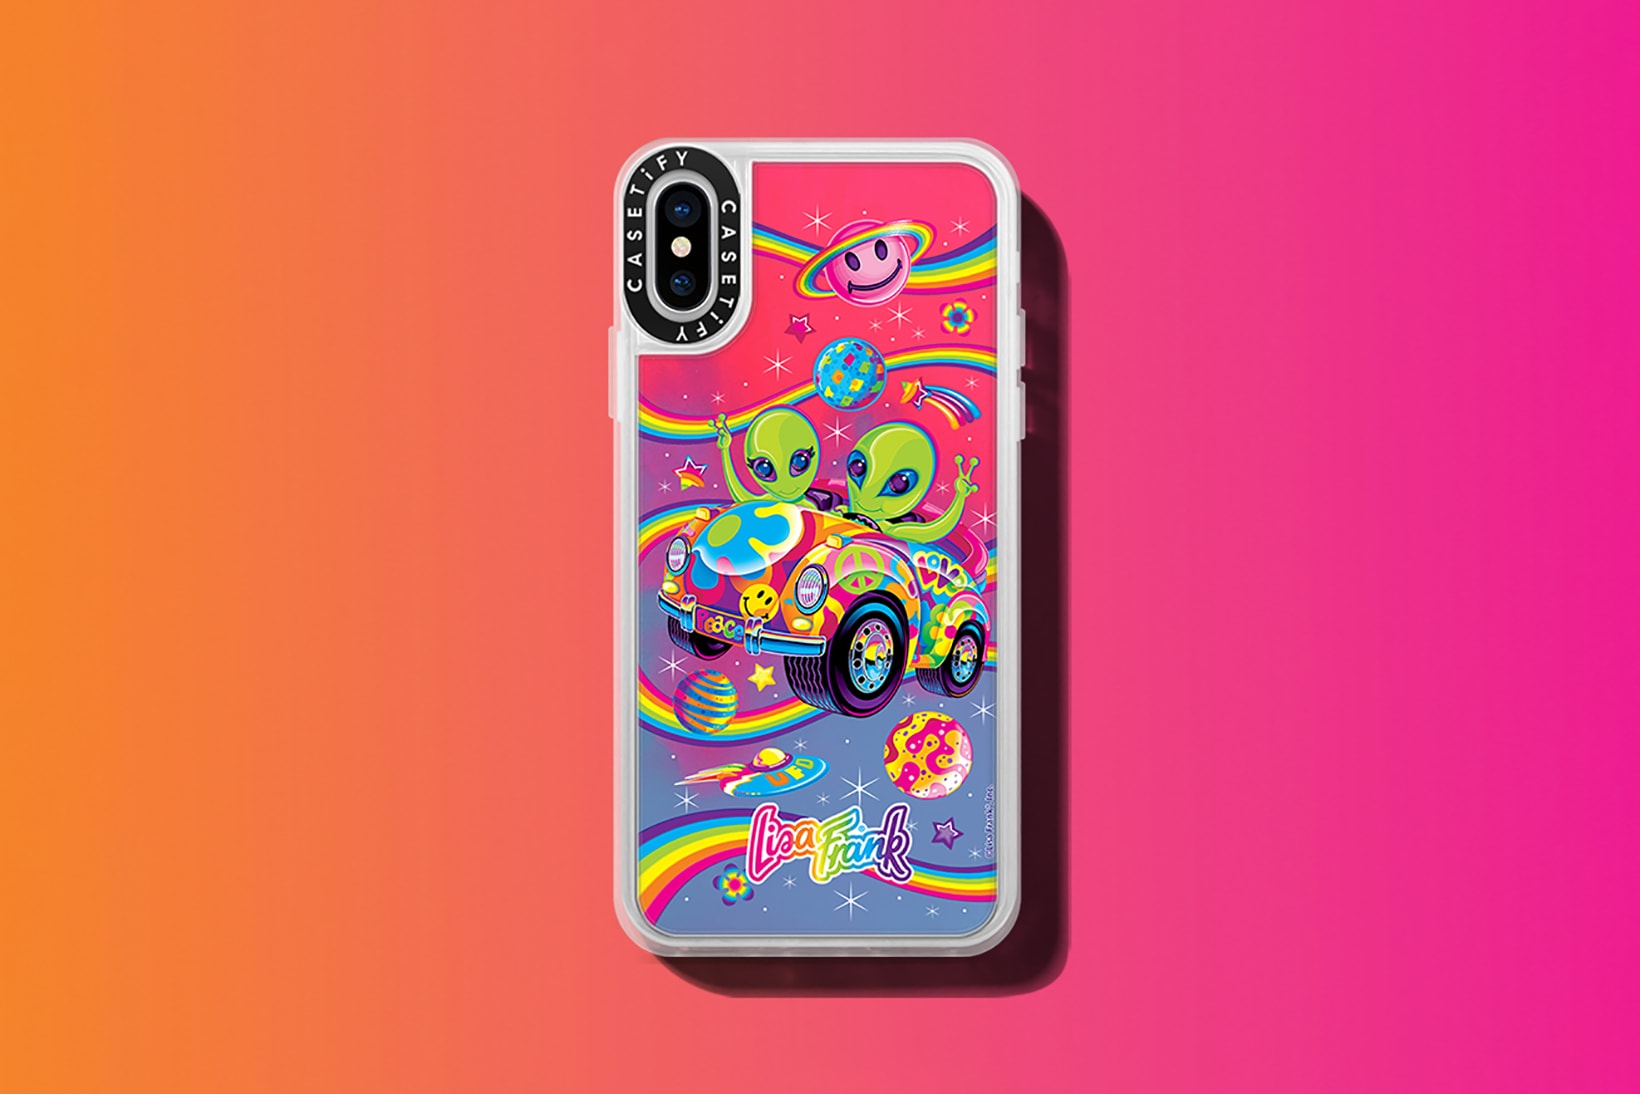 casetify lisa frank collaboration phone cases apple iphone samsung android phone airpods macbook ipad accessories tech stickers throwback childhood